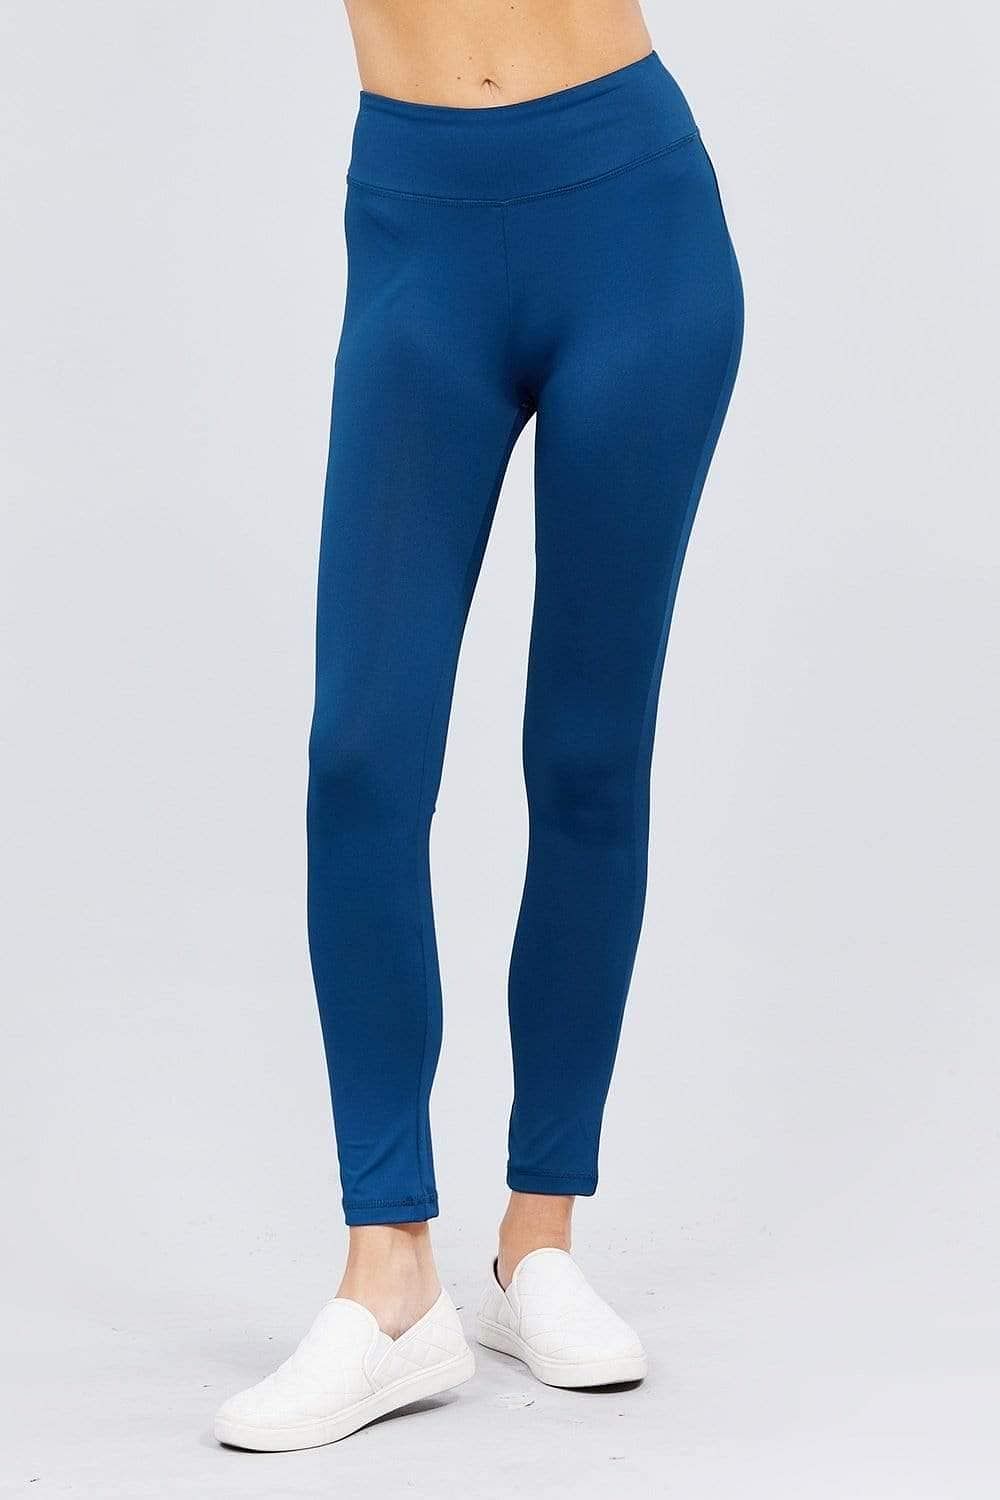 Royal Blue Yoga Workout Leggings - Shopping Therapy M Athletic Wear